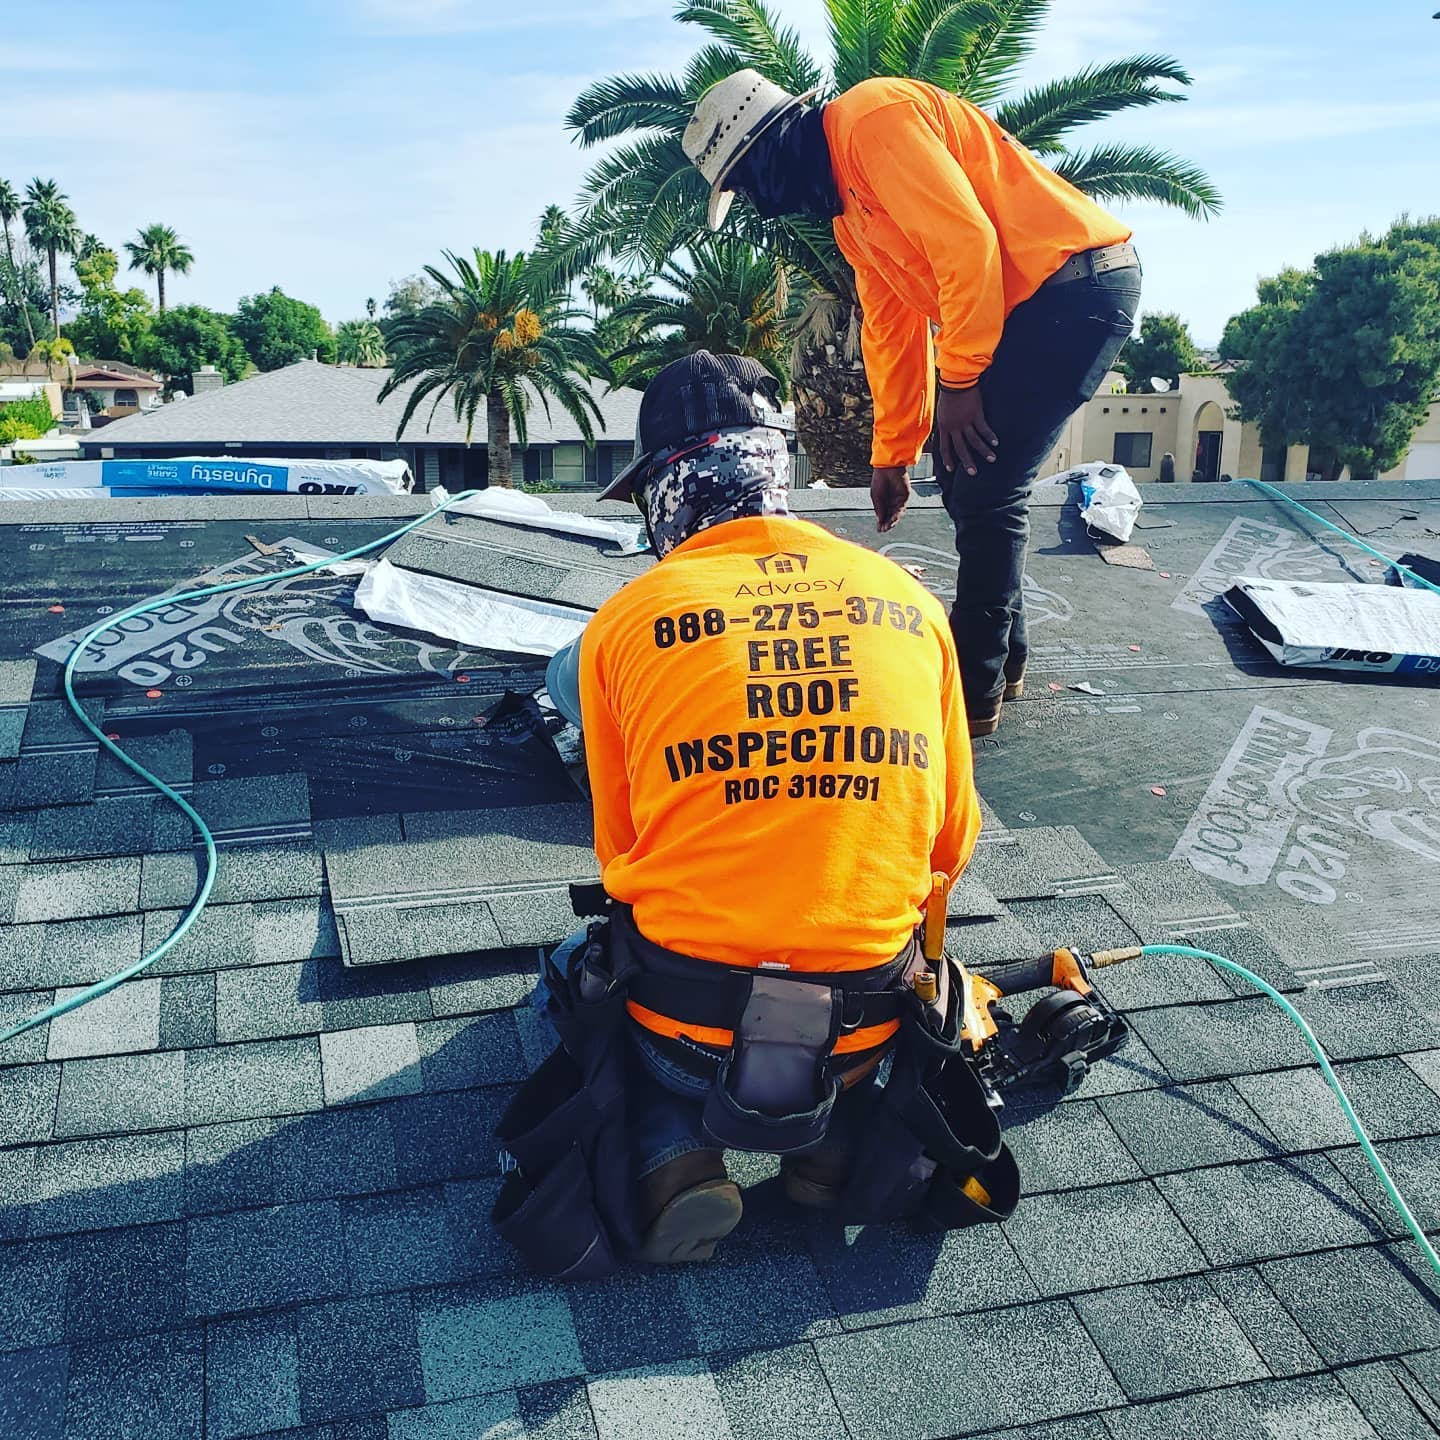 What’s the Average Time The Roofing Company Has Been in Business?